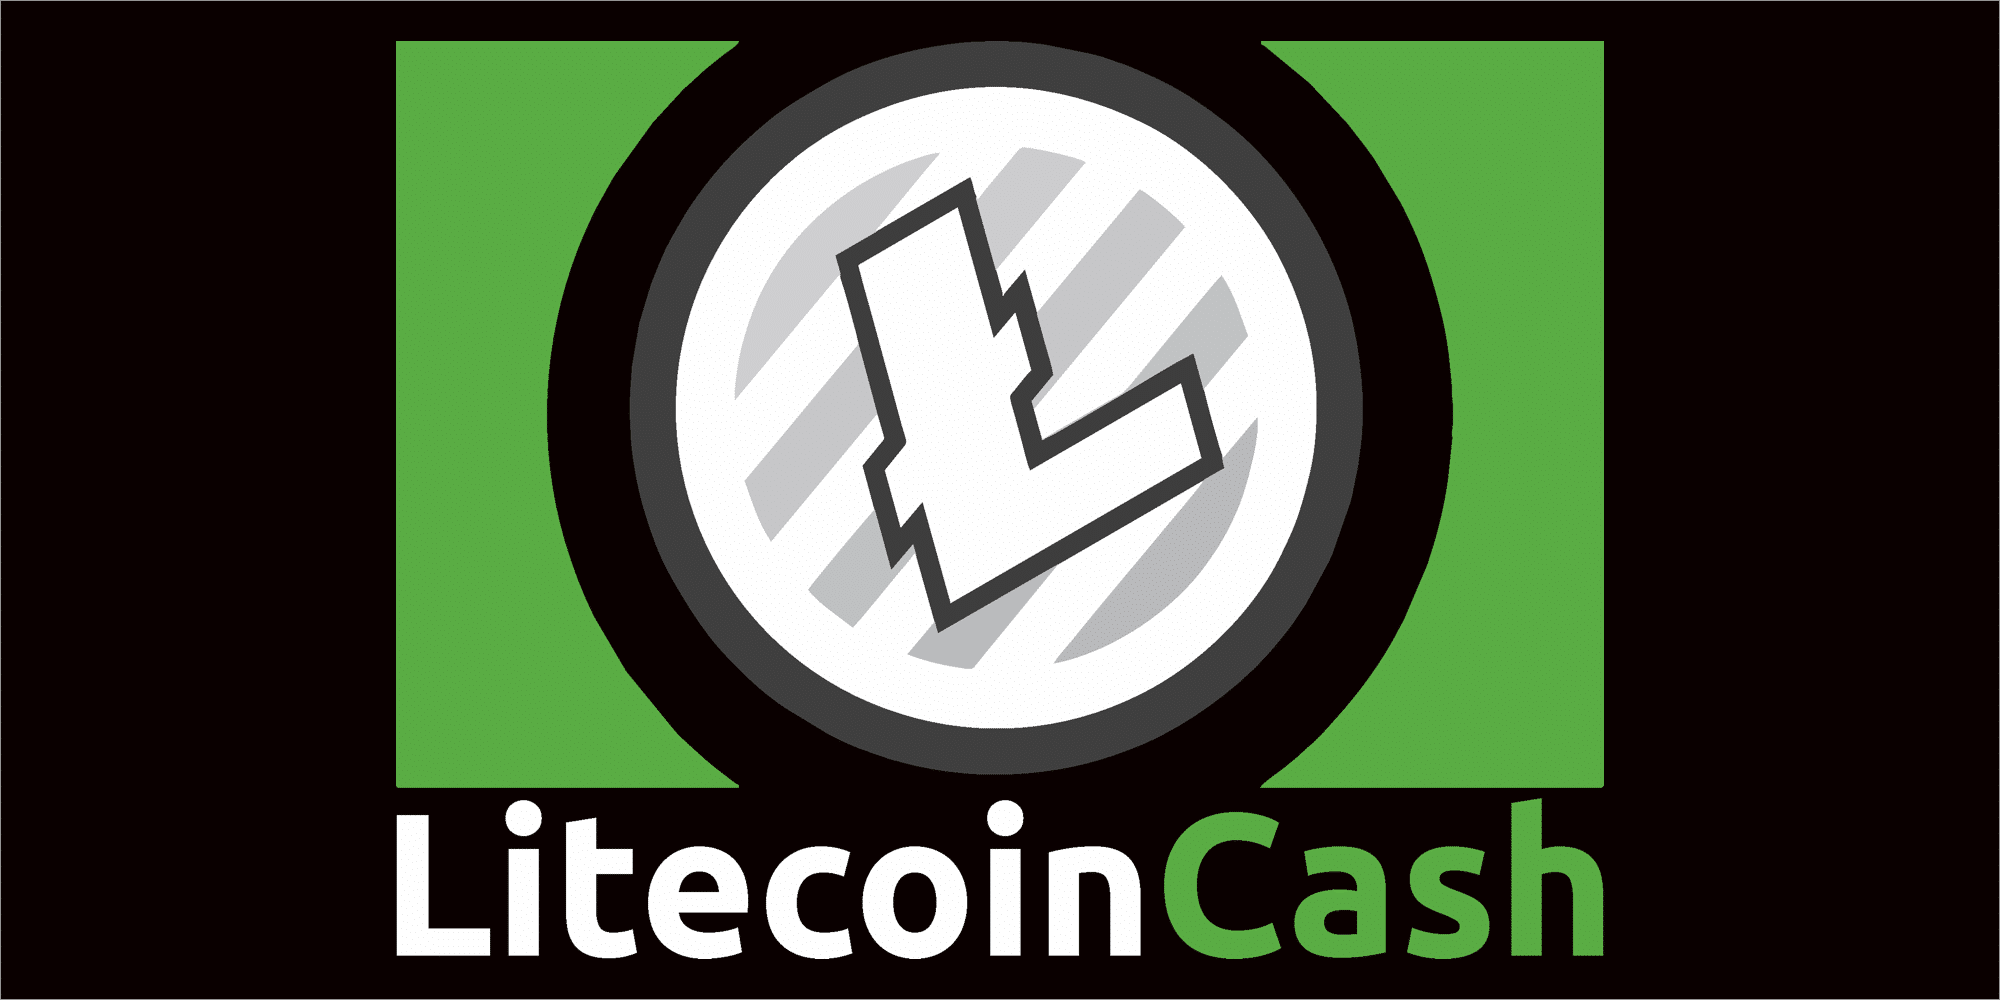 Litecoin cash how to get it from having litecoin can you buy bitcoin with ethereum